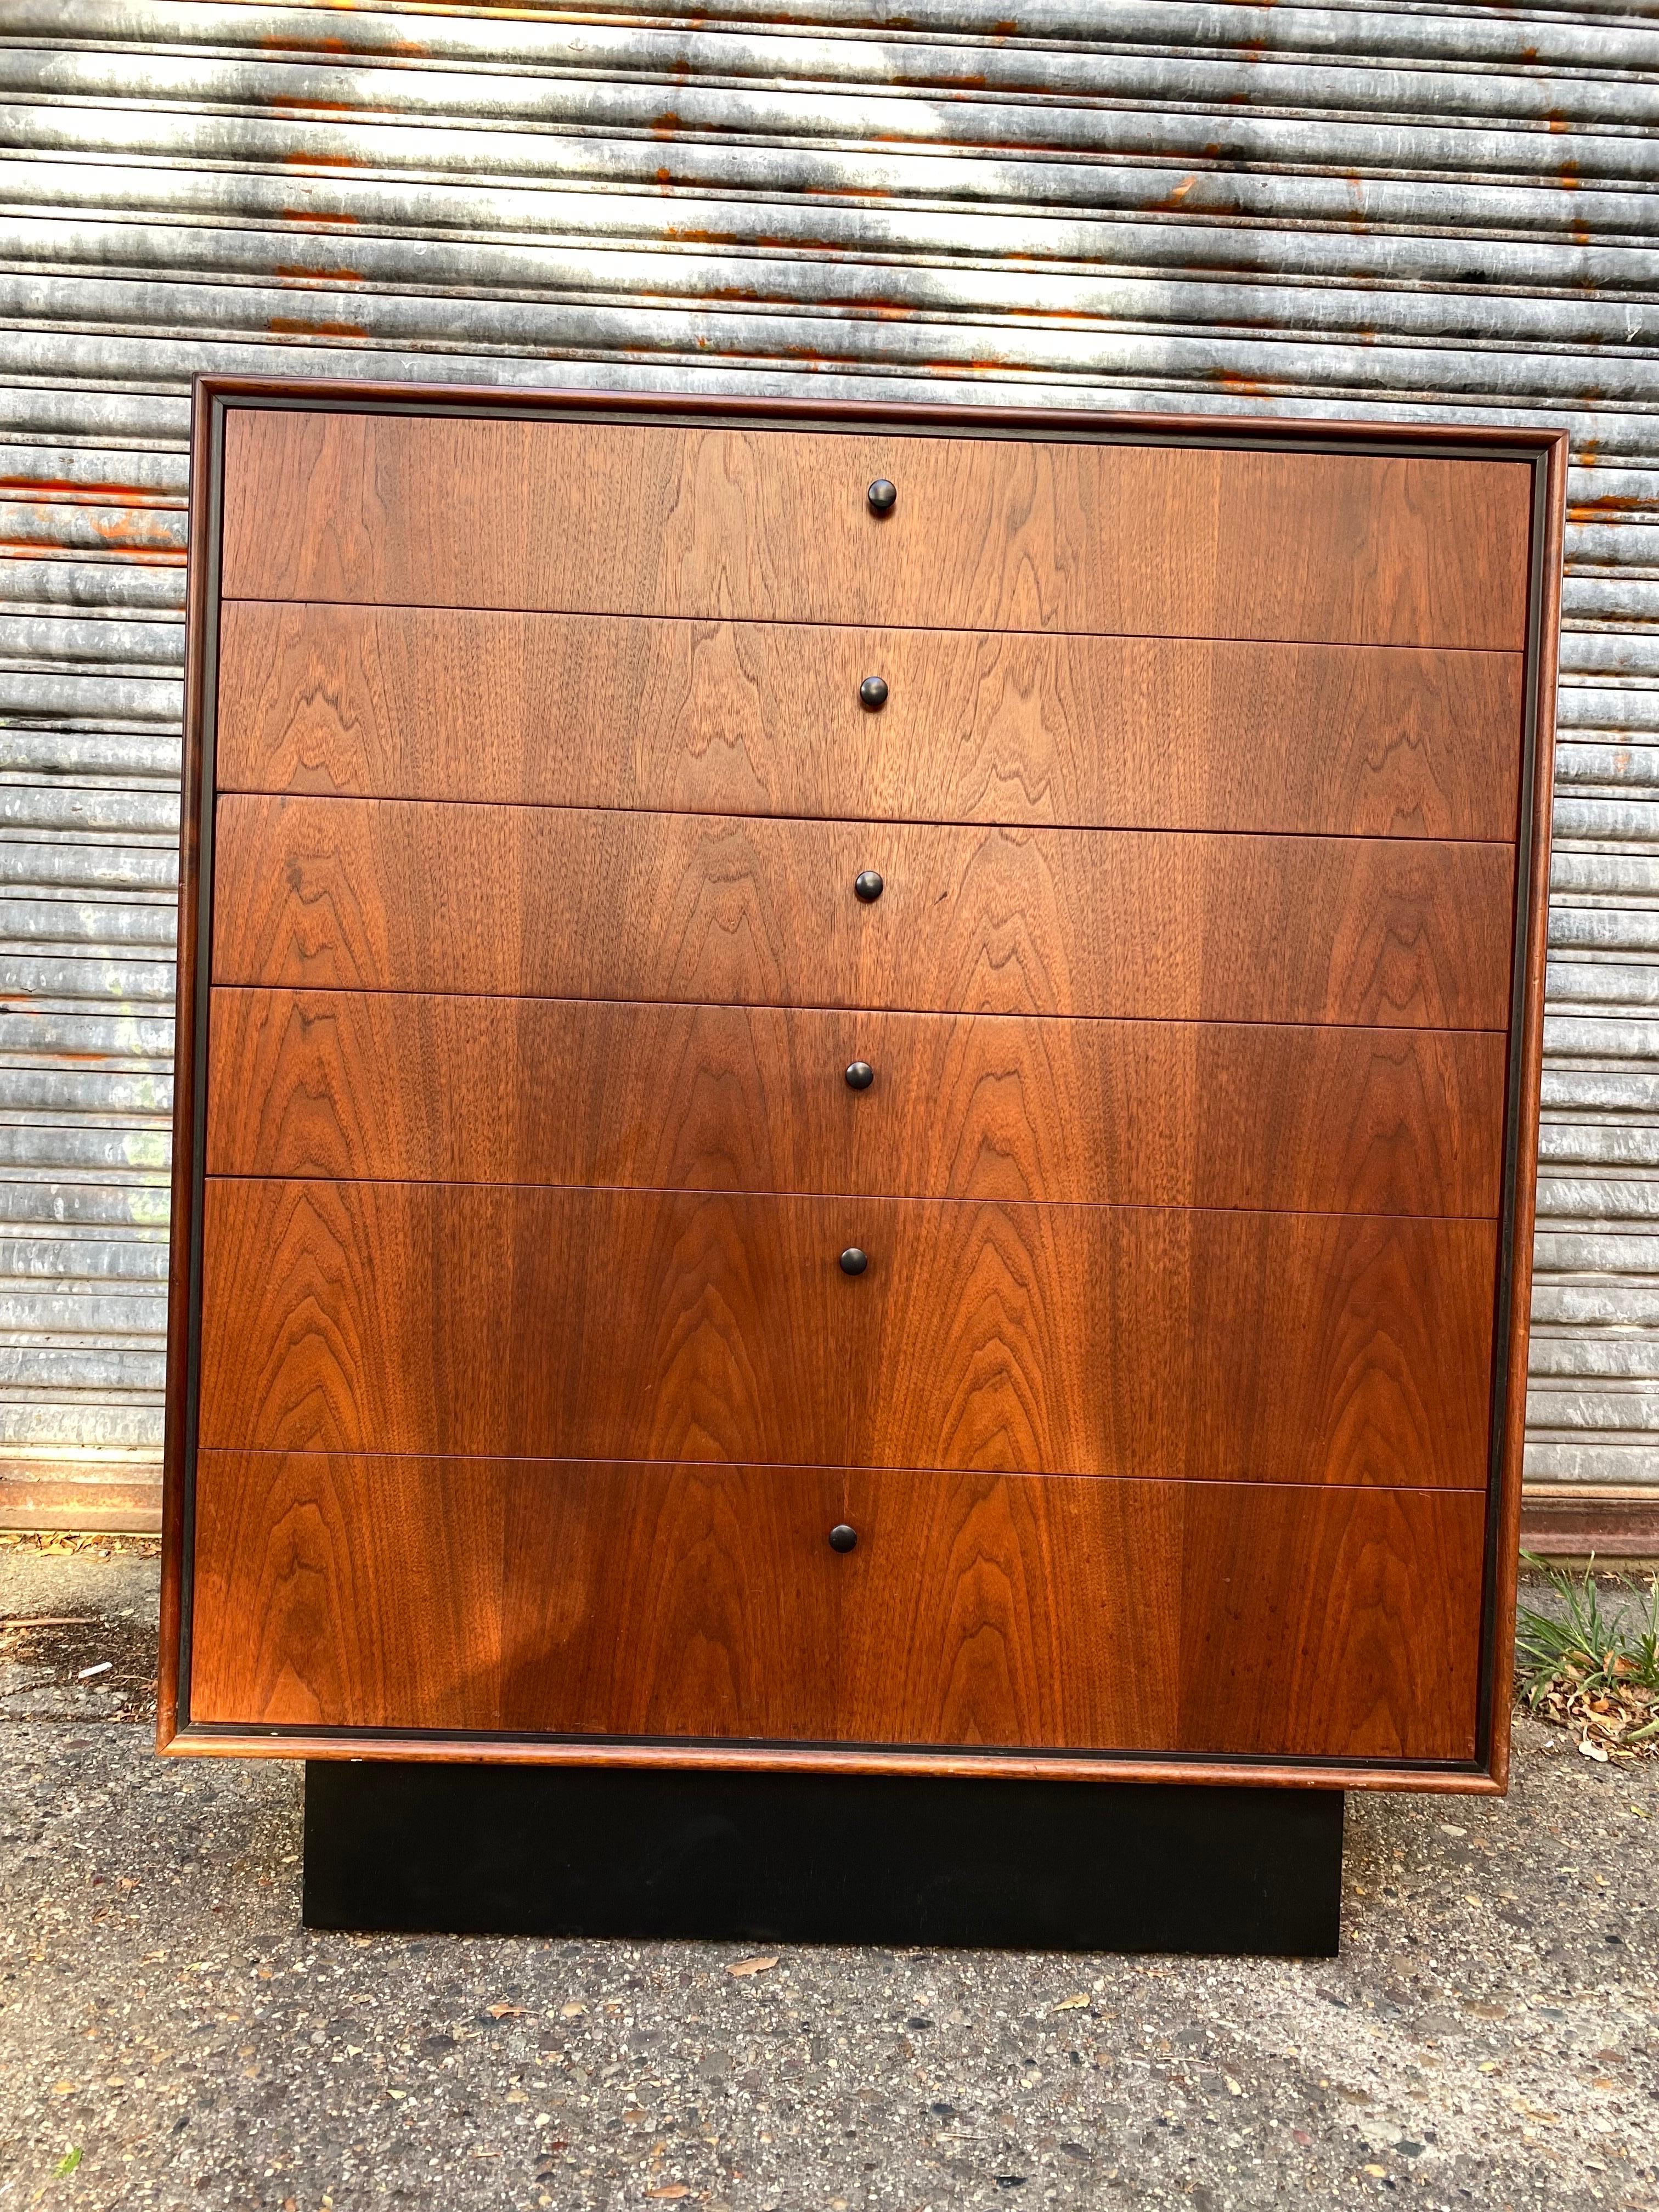 Beautiful Jack Cartwright walnut tall boy, six-drawer, dresser with black base and black wood inset detail. Dove-tale construction of drawers. Newly Refinished and ready to go! 2 Matching Dressers available! Priced individually!